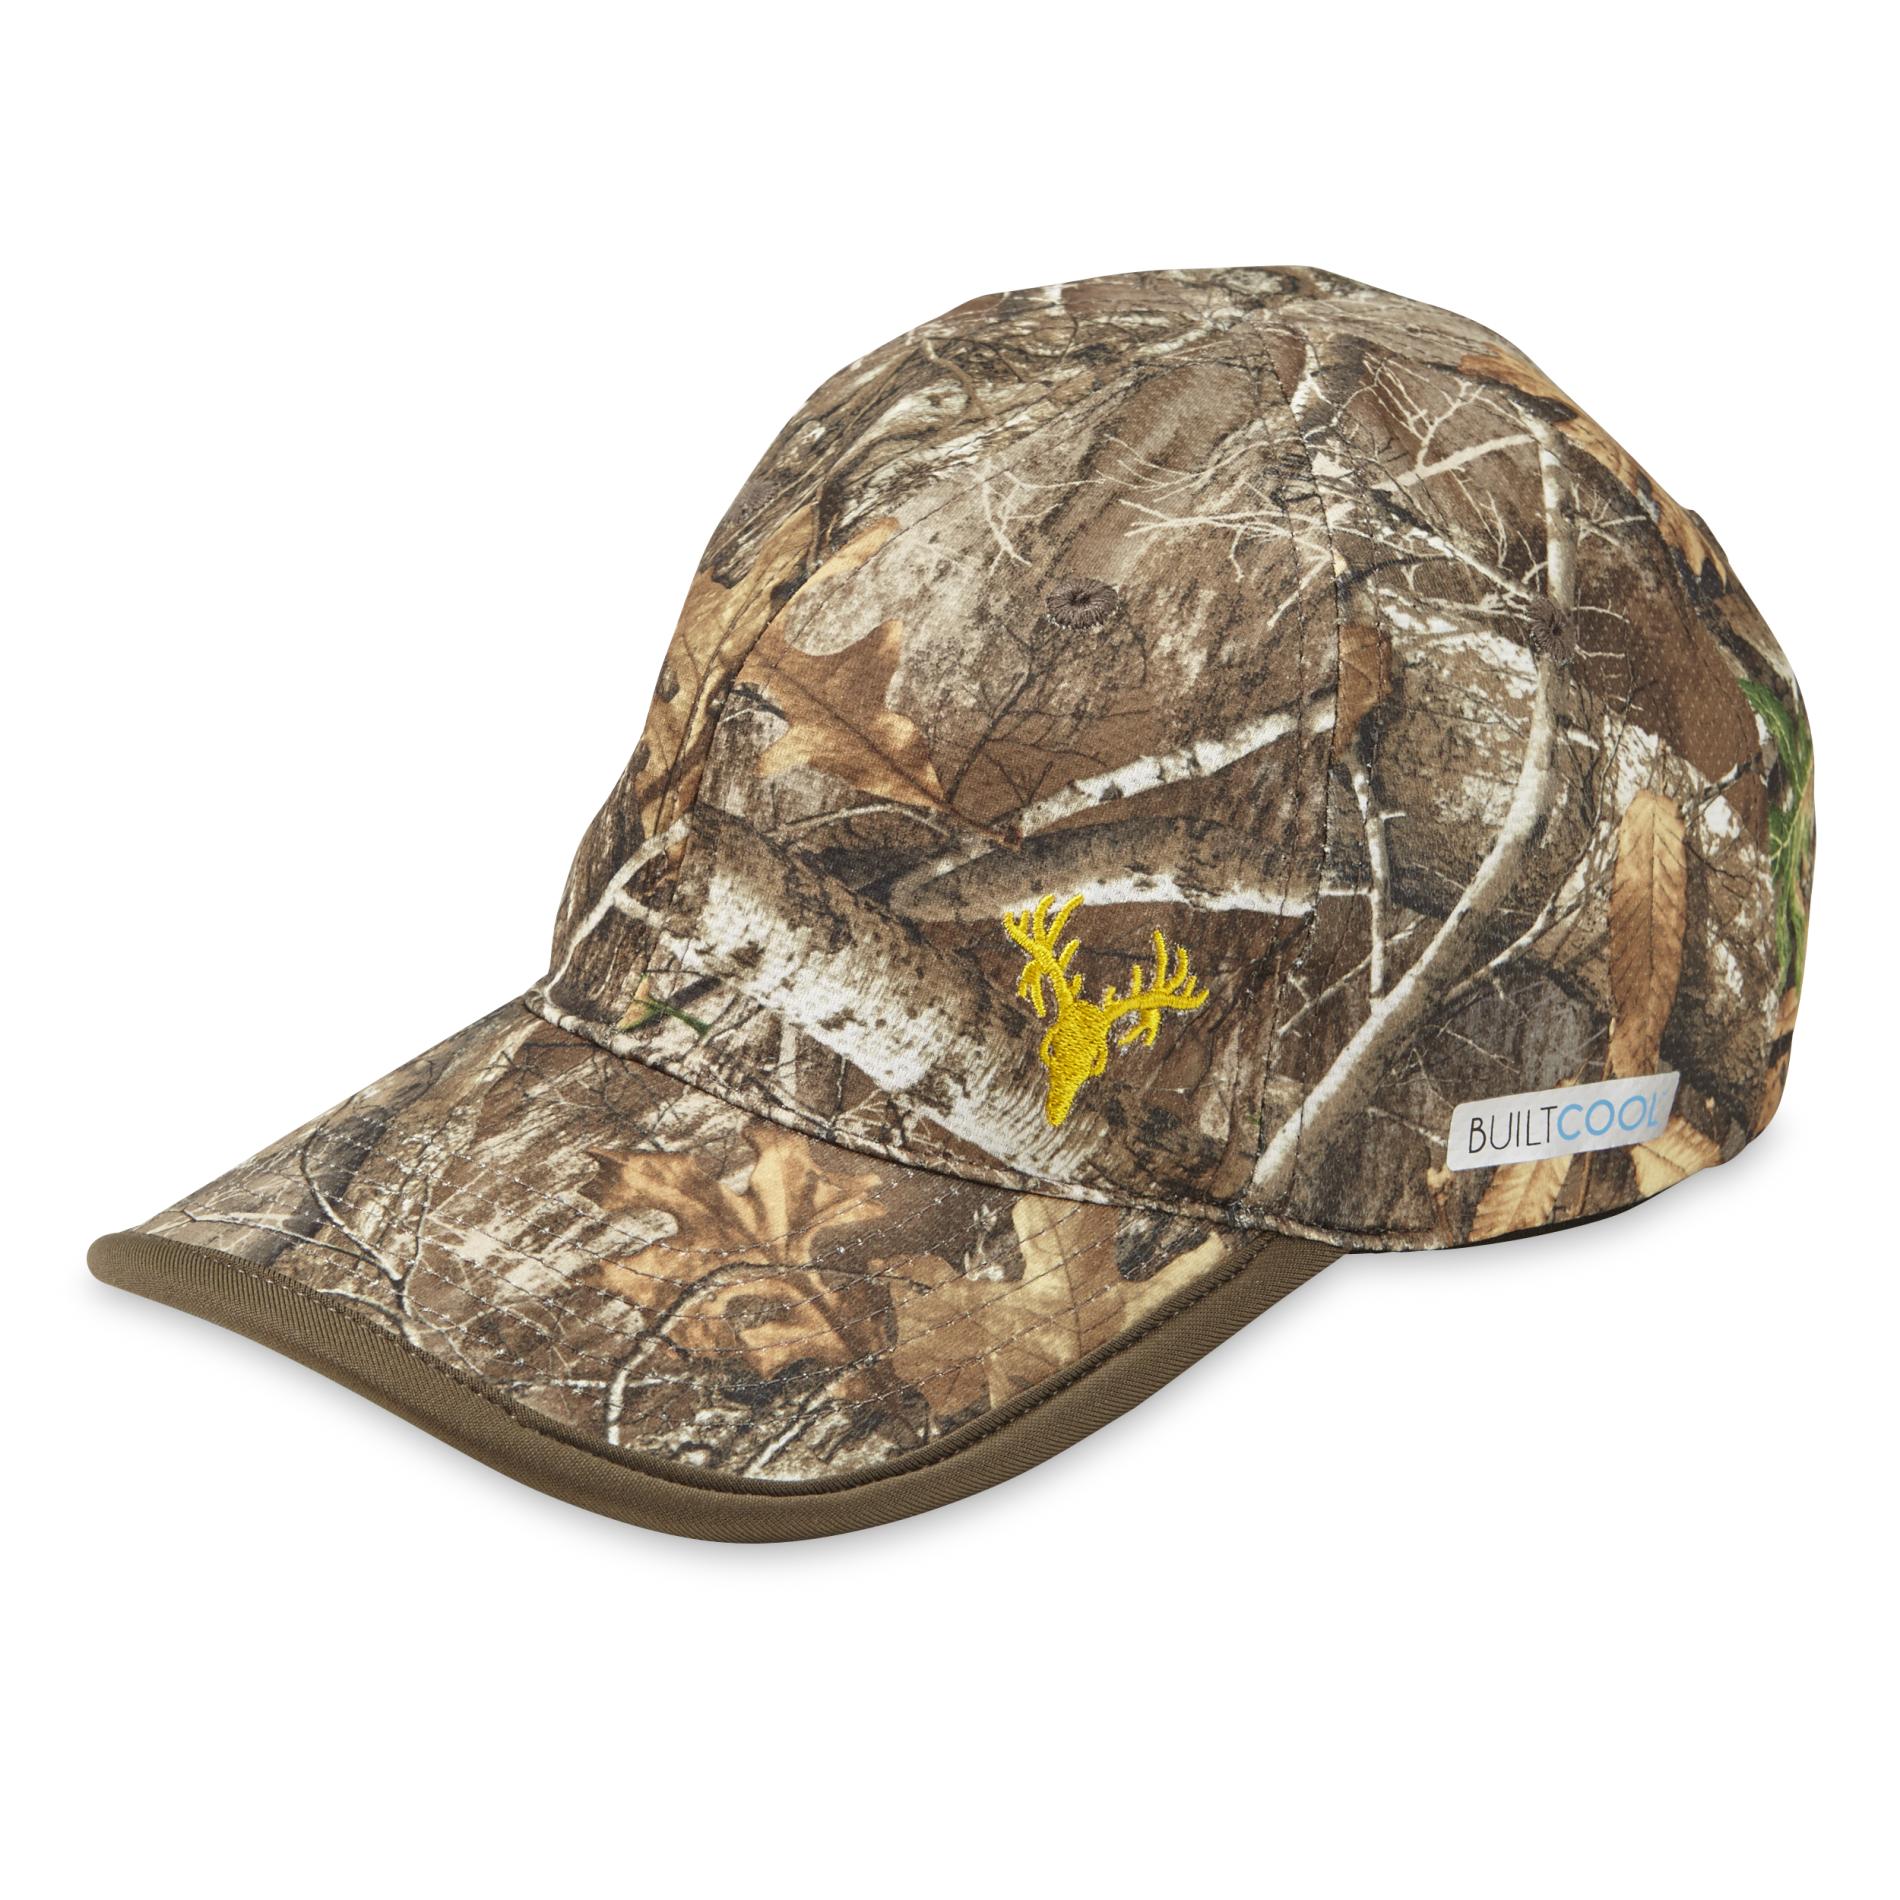 Realtree Men's  Camouflage Unstructured Baseball Cap